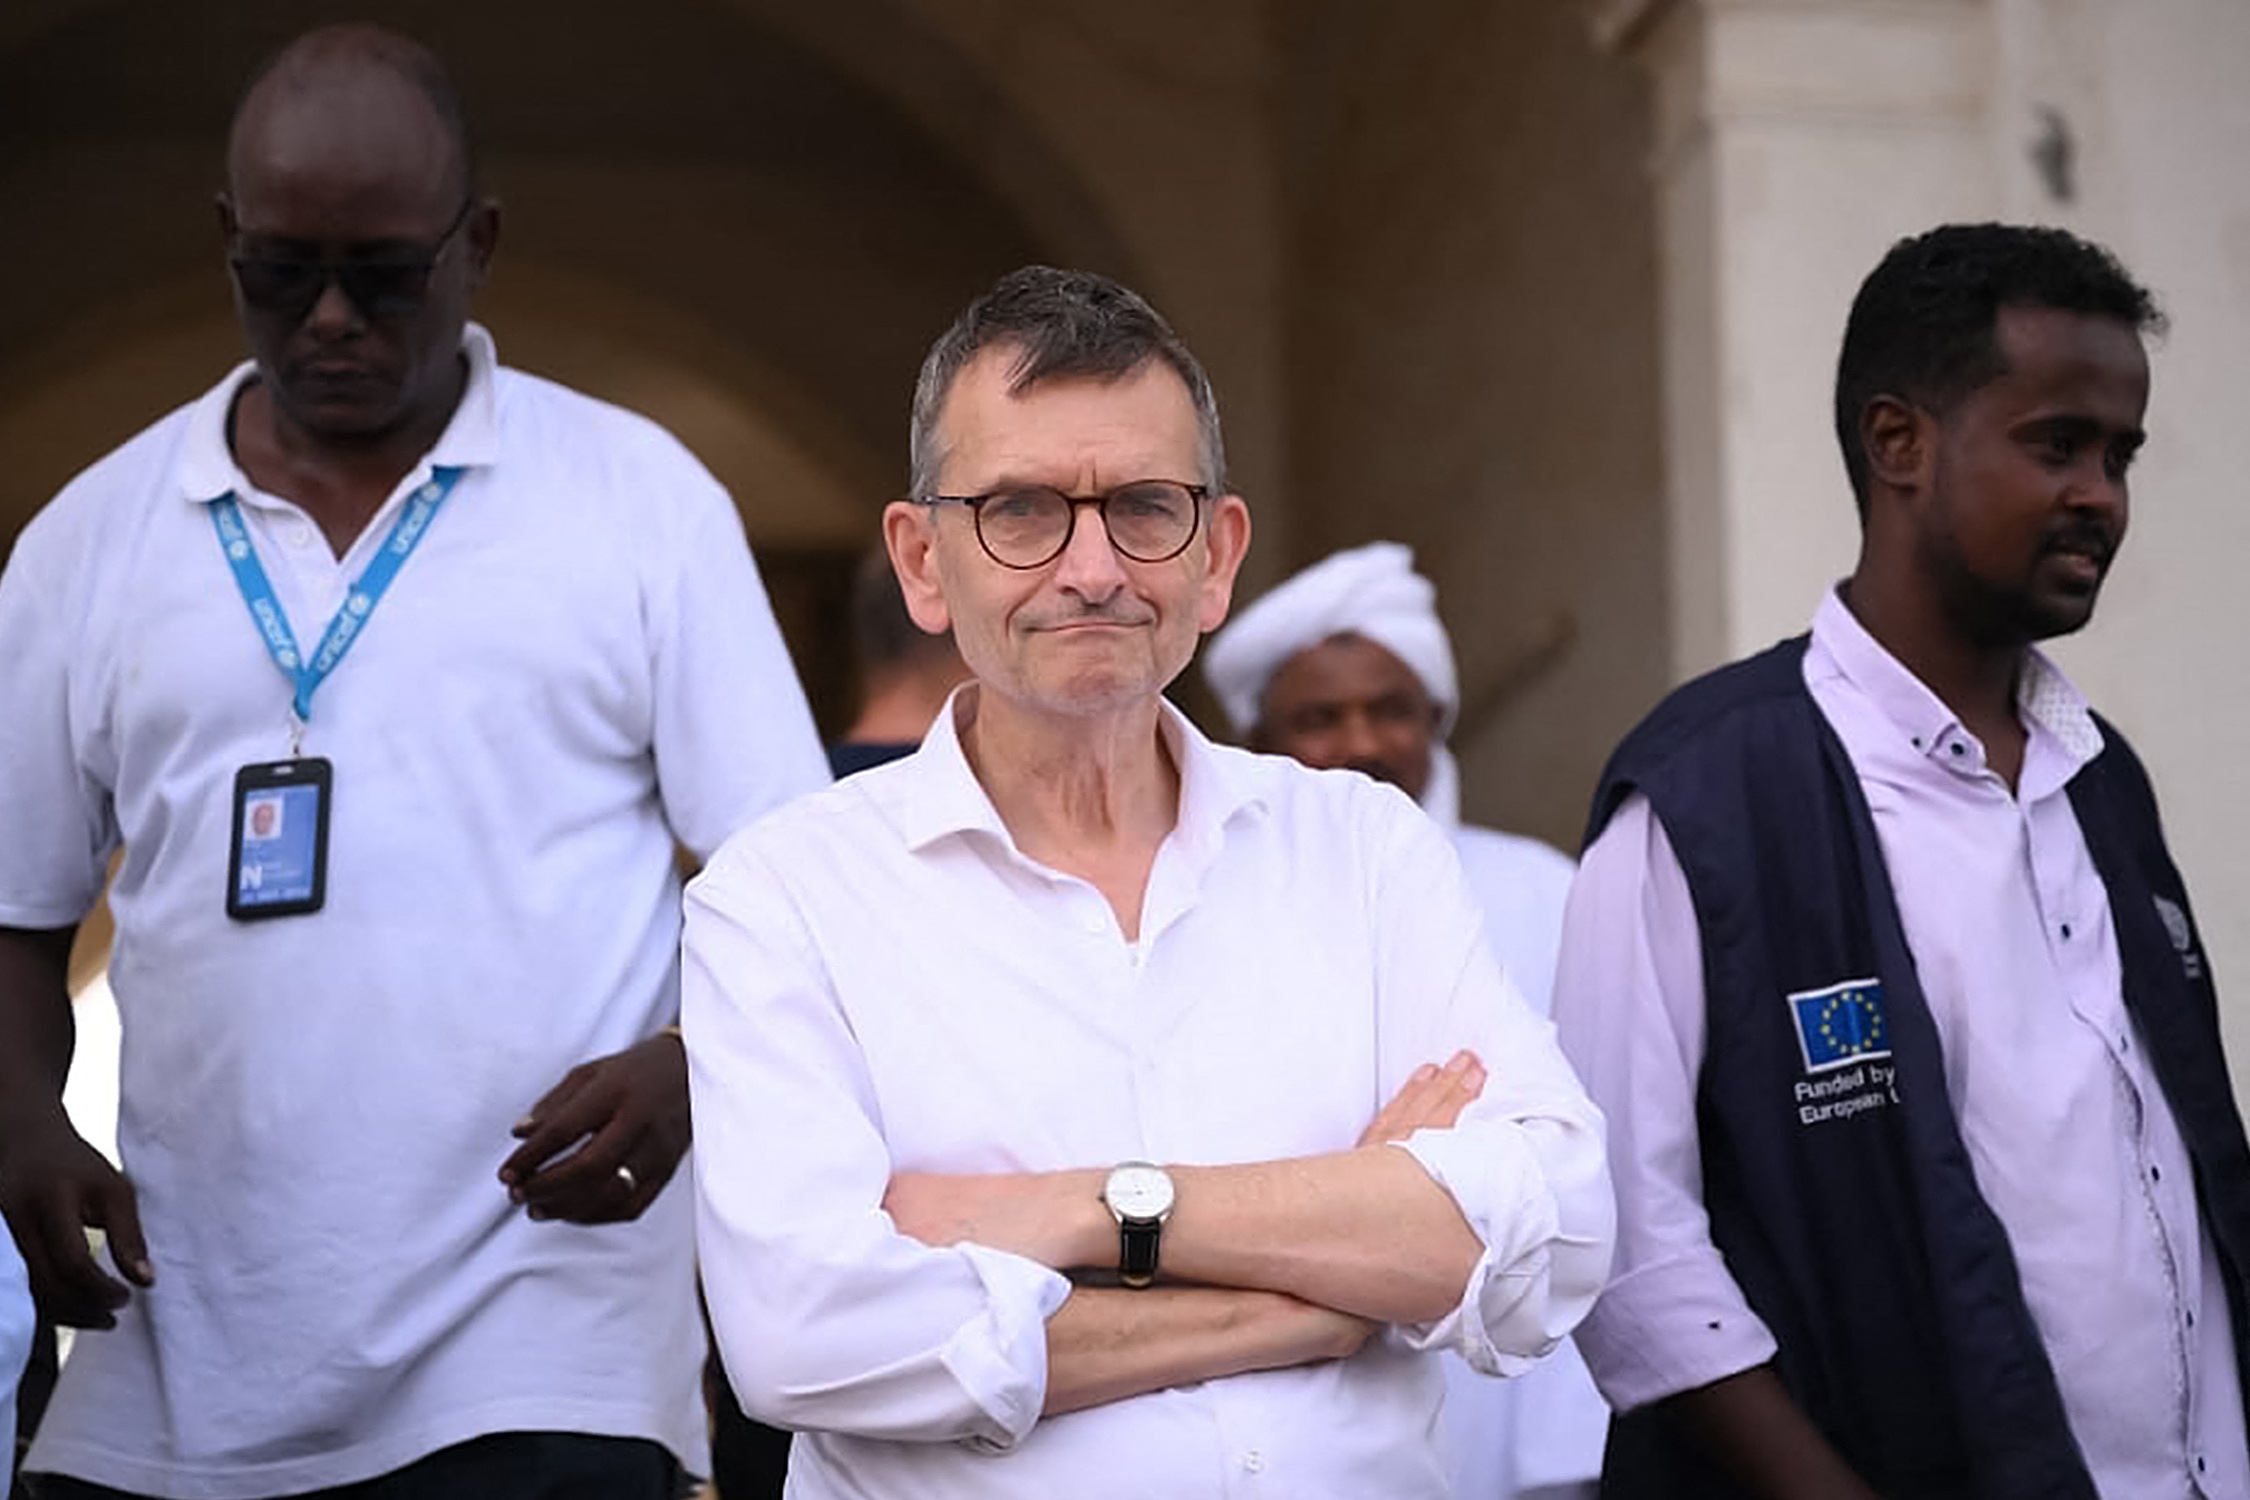 Volker Perthes (C), Special Representative of the United Nations Secretary-General for Sudan and Head of the UN Integrated Transition Assistance Mission in Sudan, oversees the evacuation of internationally-recruited personnel in Port Sudan on April 24, 2023 (AFP)